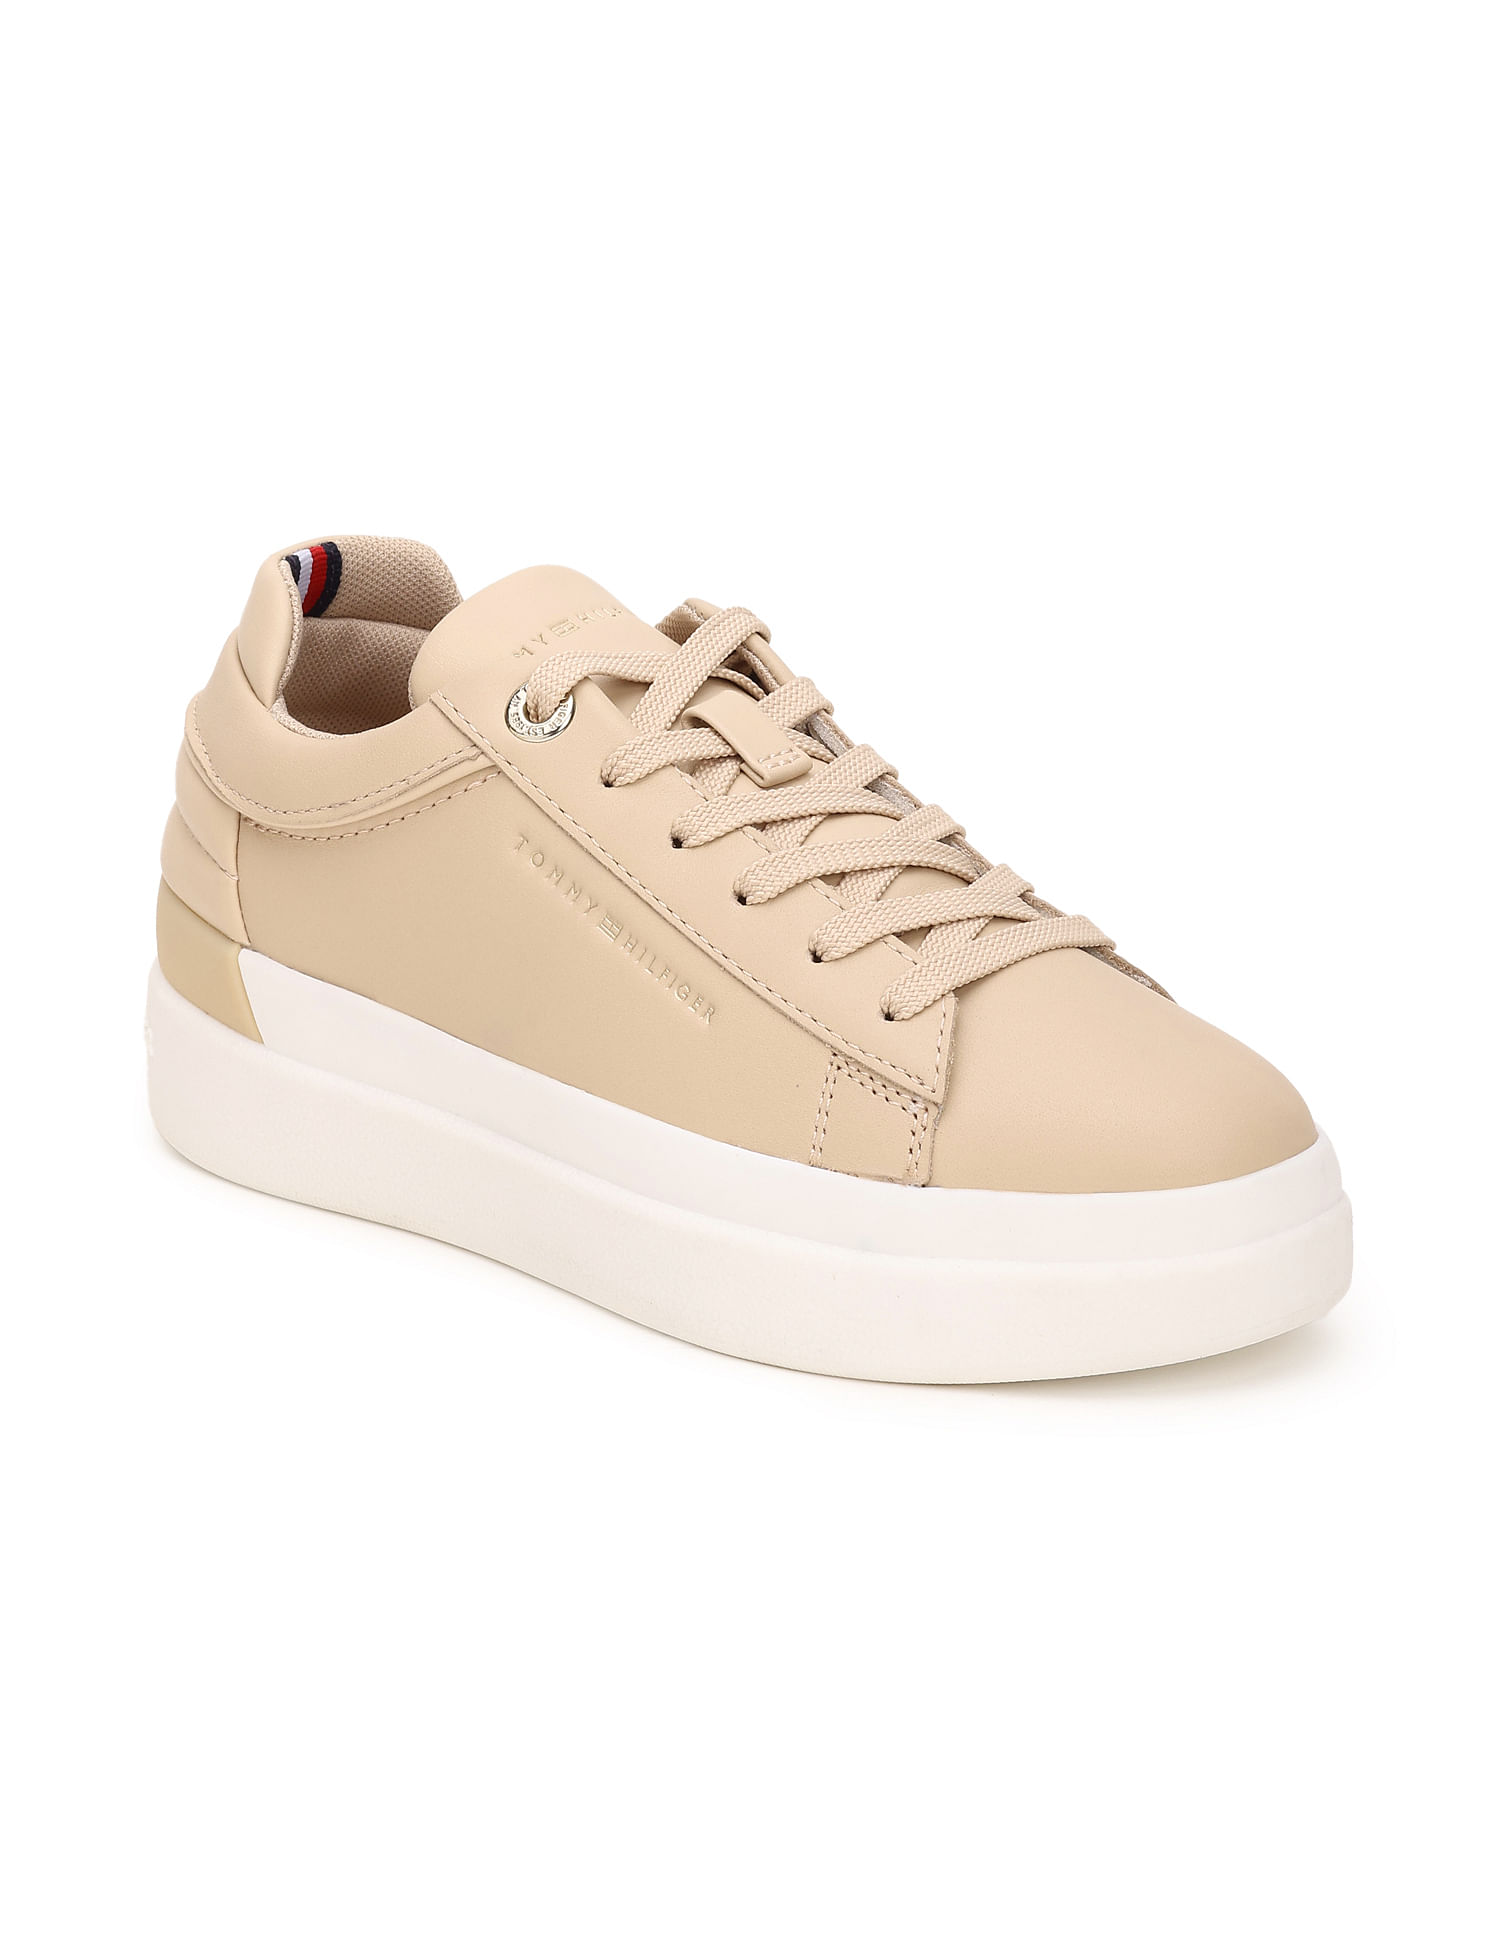 Buy Tommy Hilfiger Colour Block Elevated Leather Sneakers